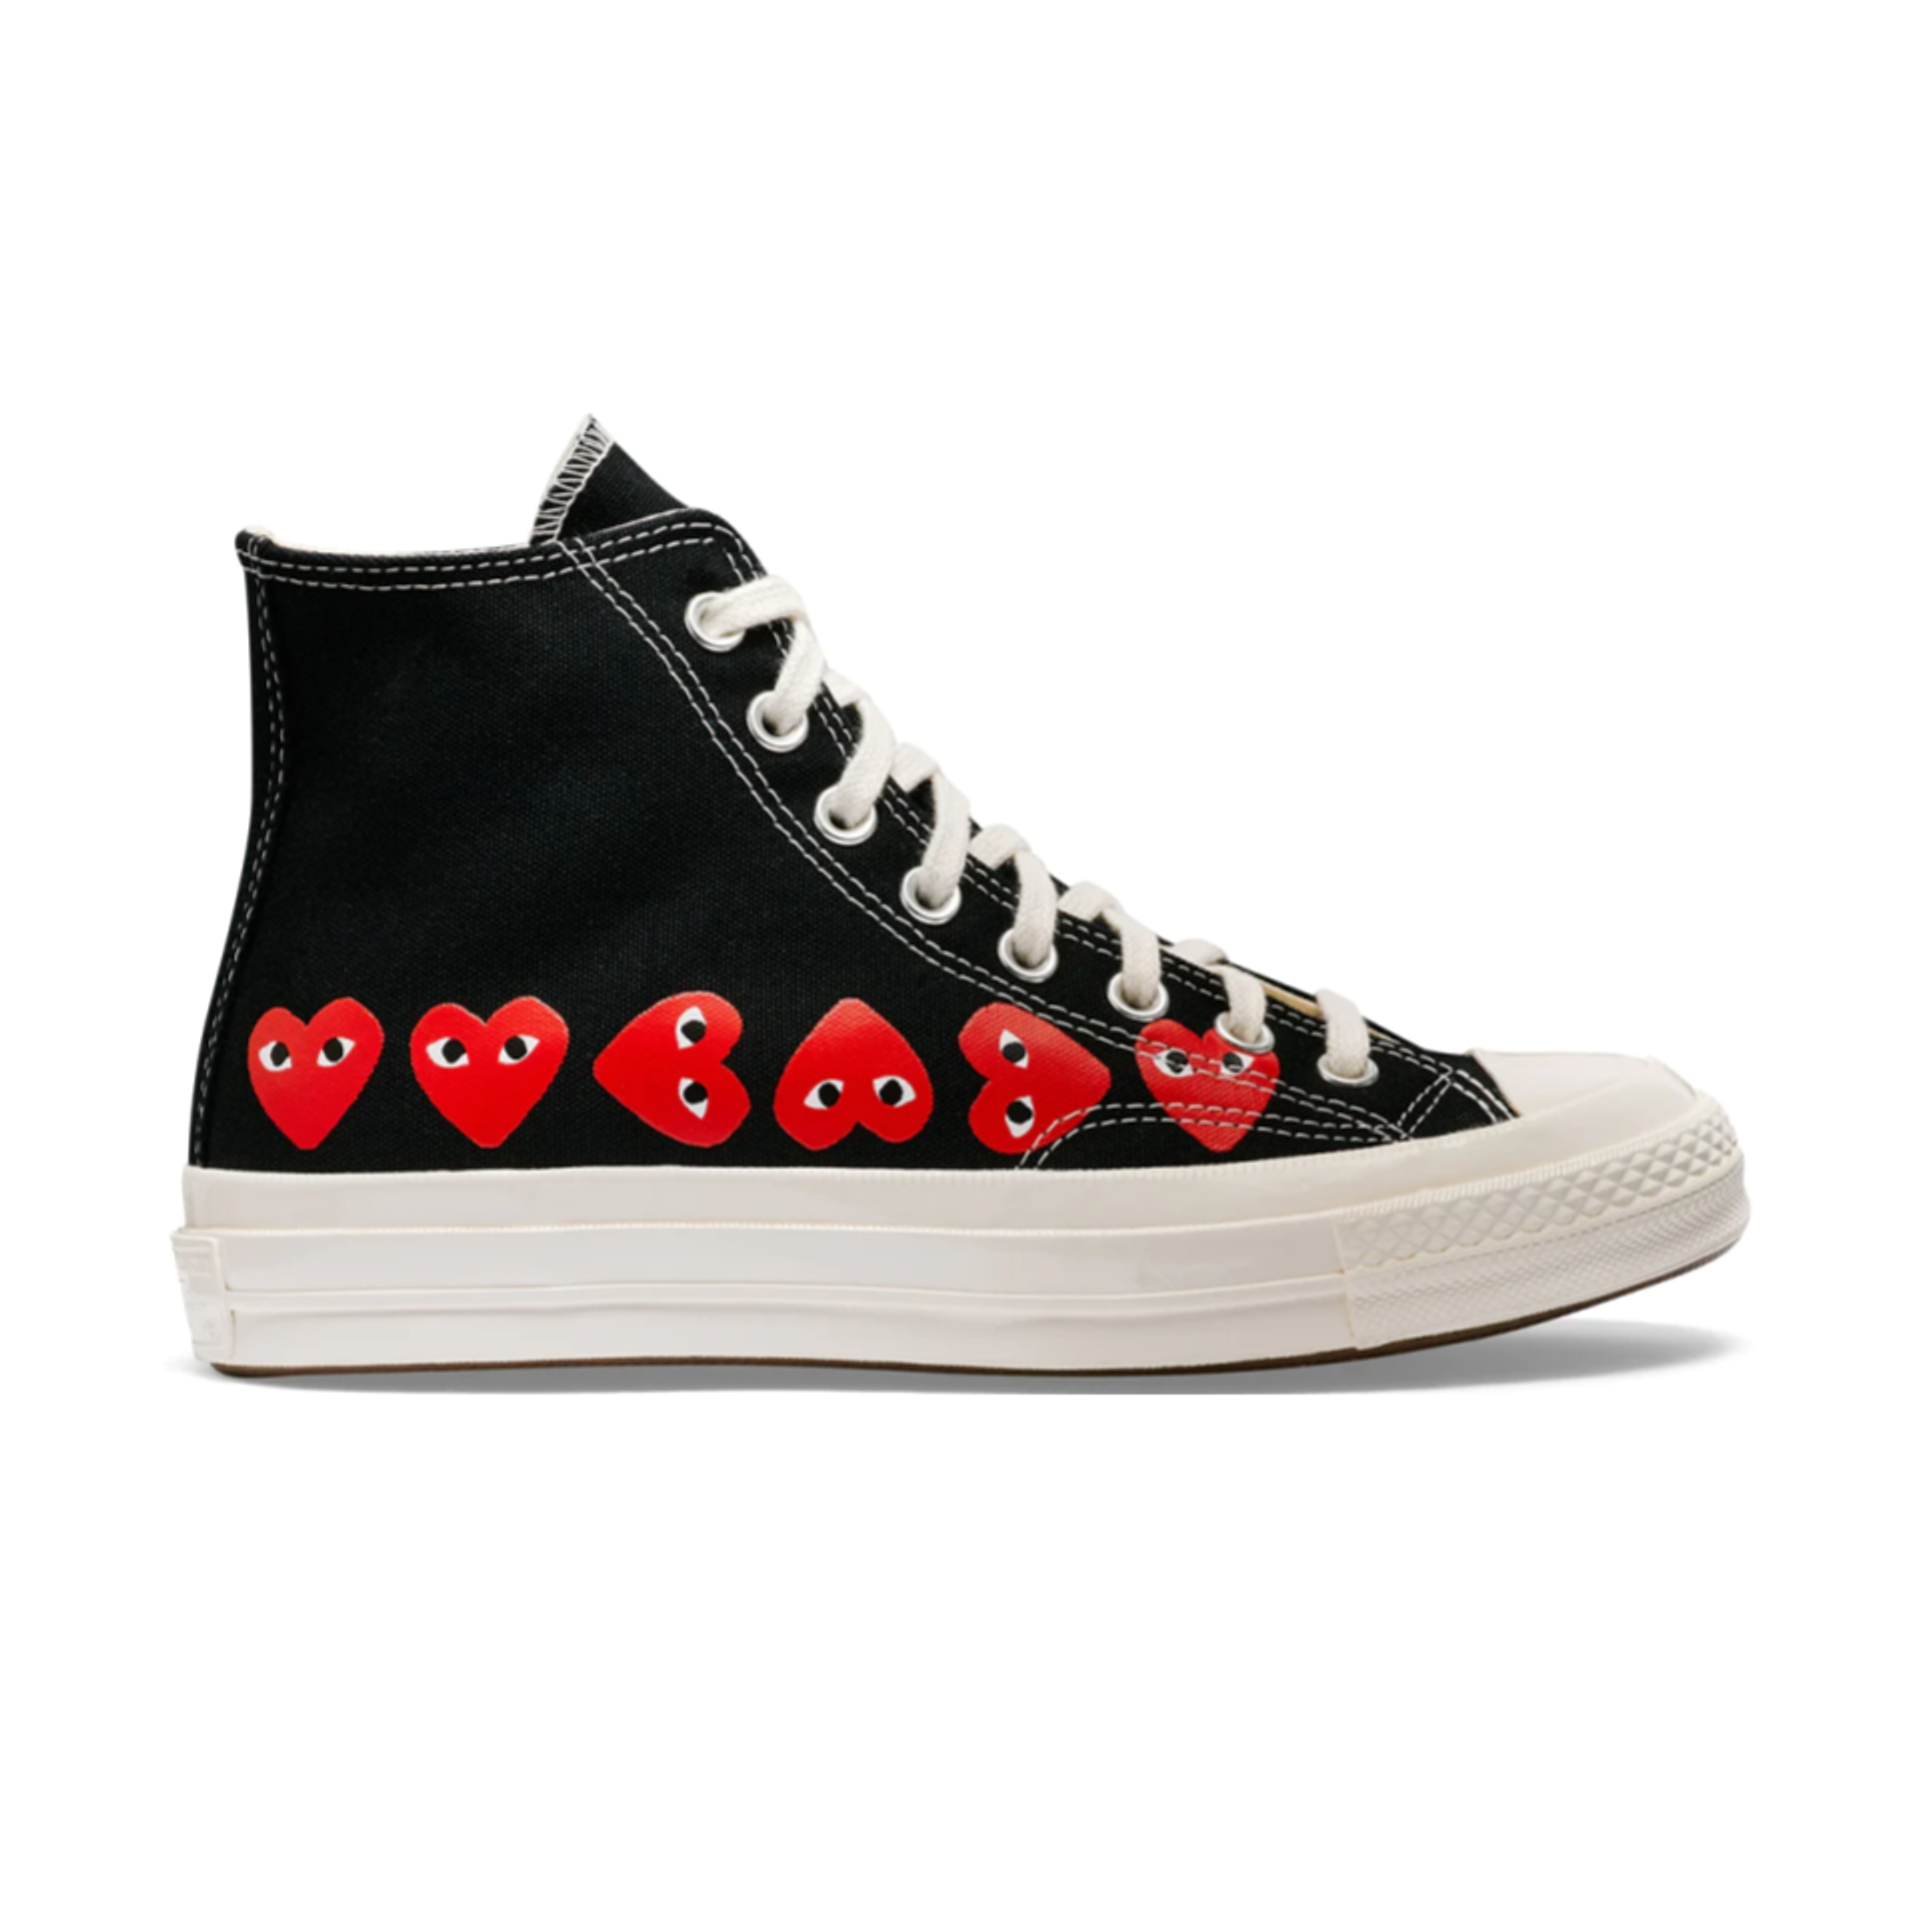 Comme des Garcons x Converse Chuck Taylor All Star 70 Hi 'Multi Red Heart' Black